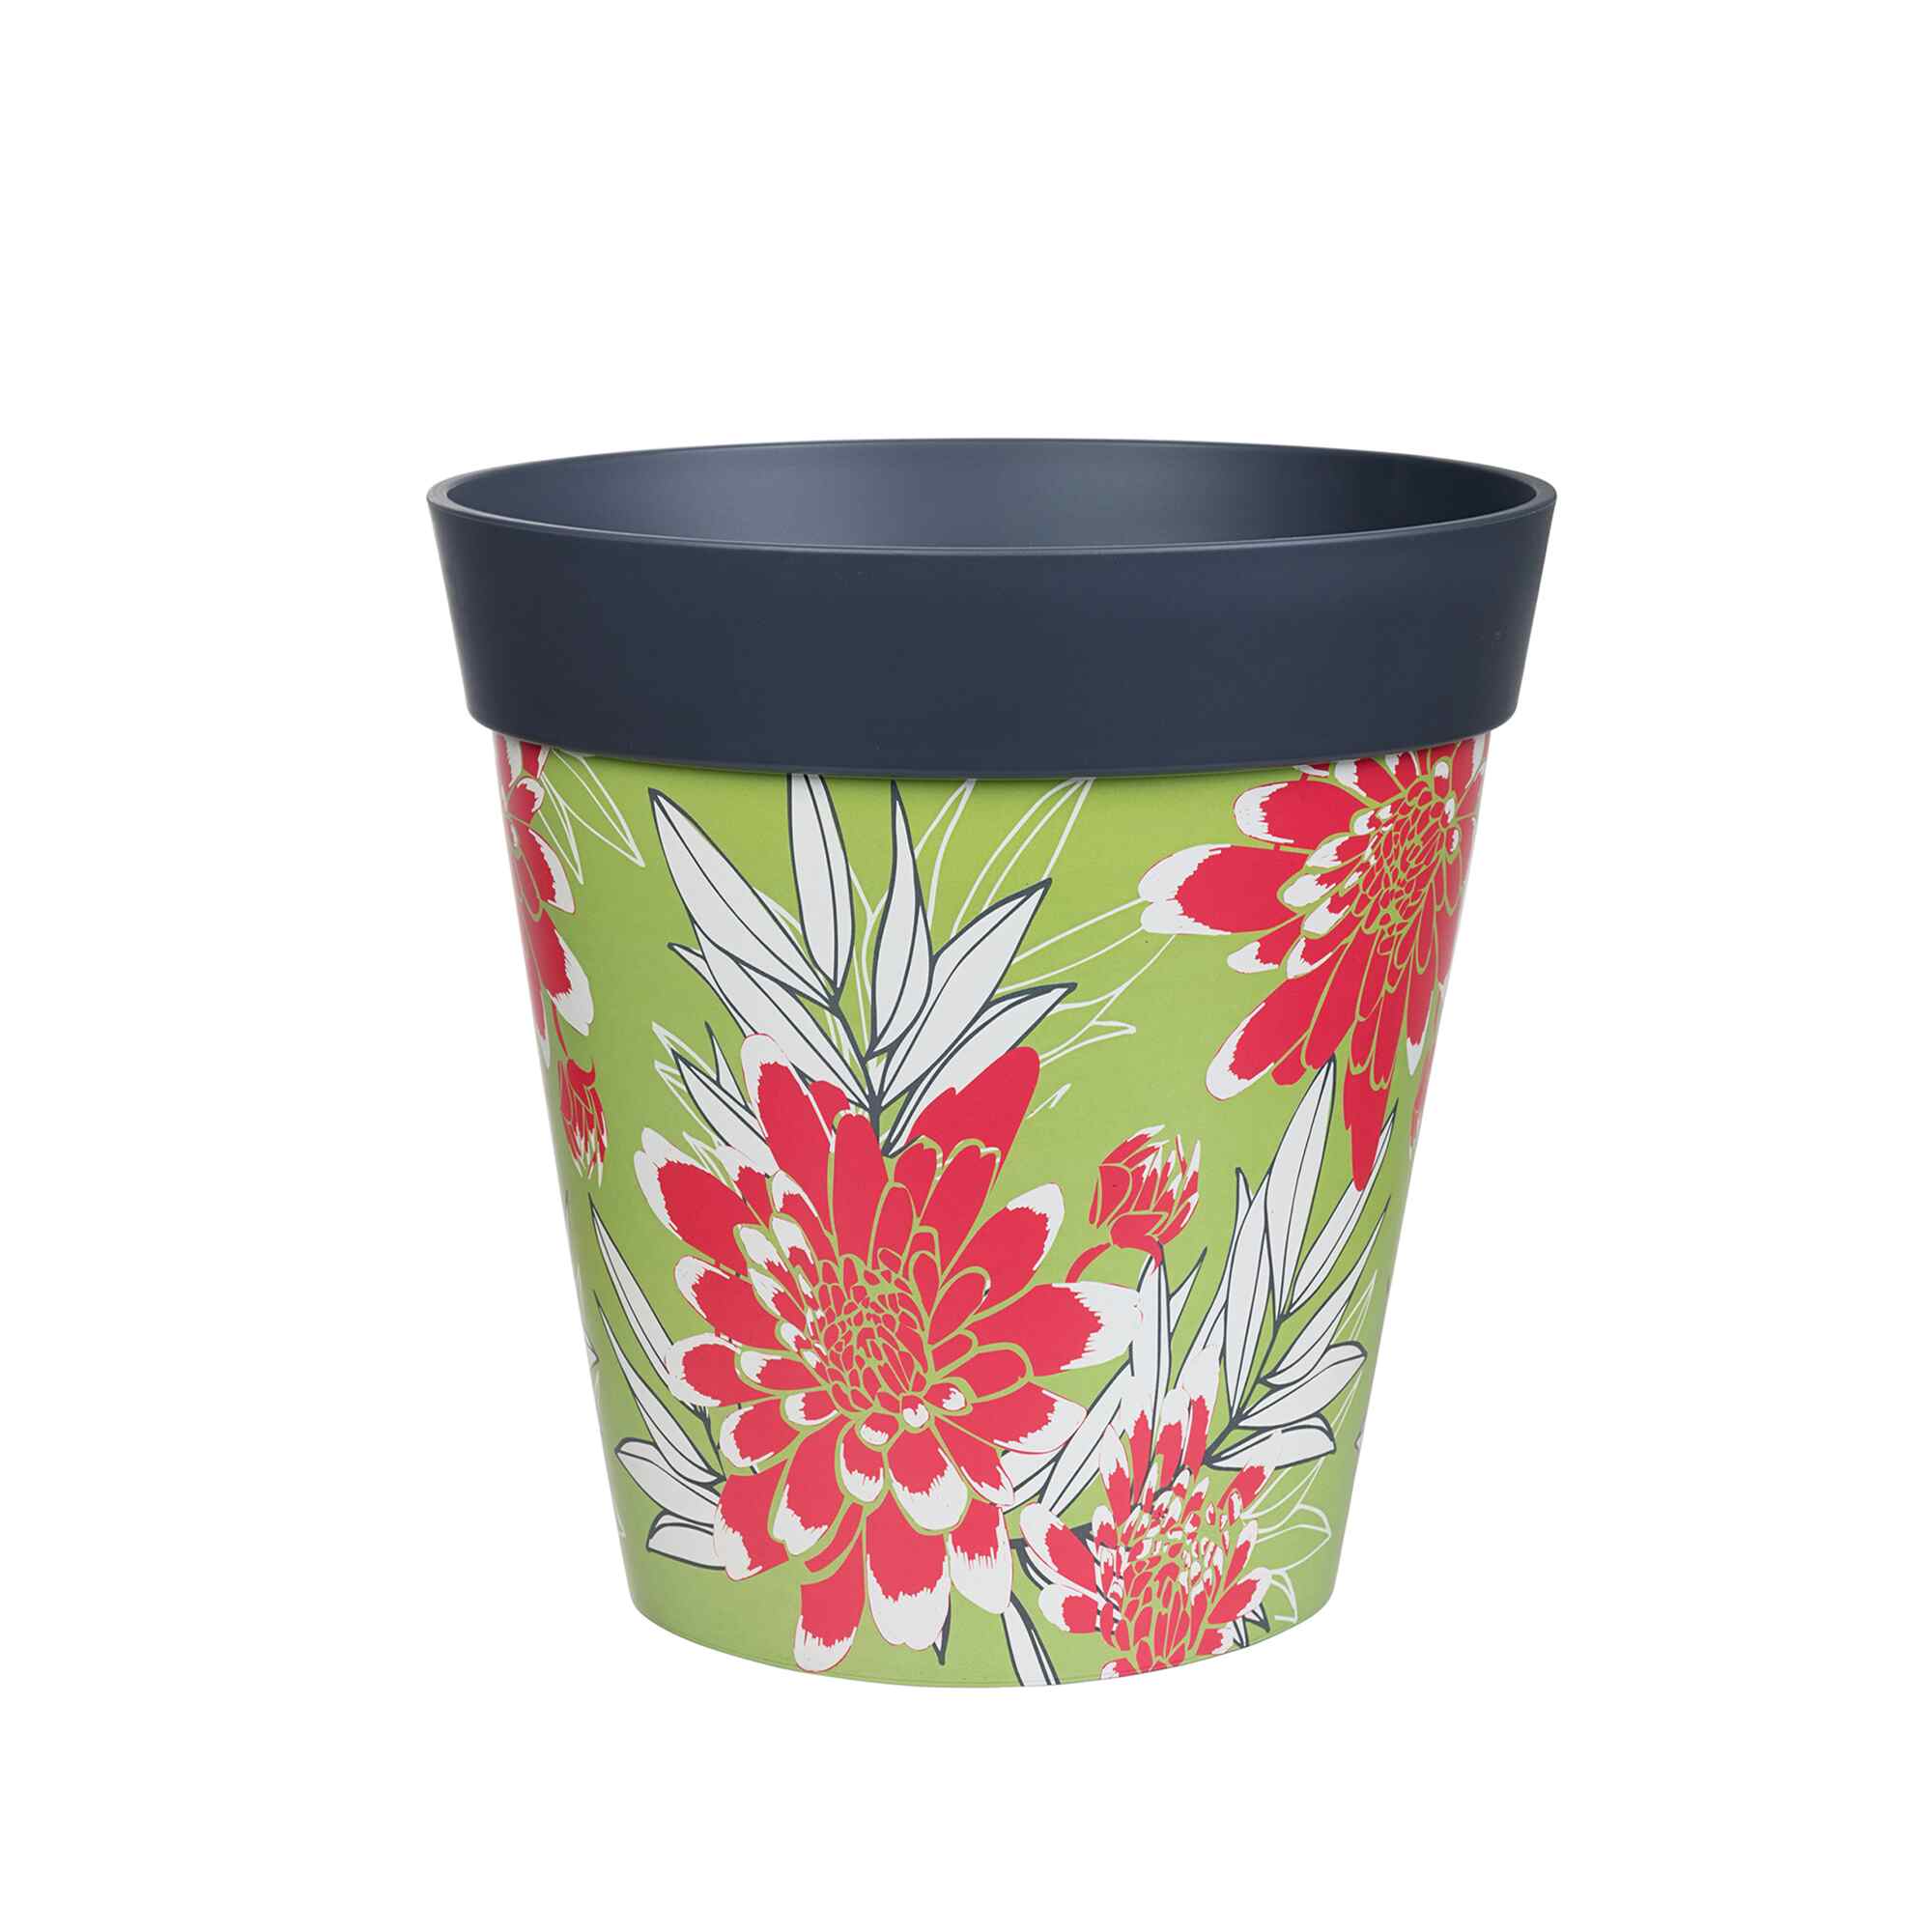 Picture of Large 25cm Plastic Green and Red Floral Pattern Indoor/Outdoor Flowerpot